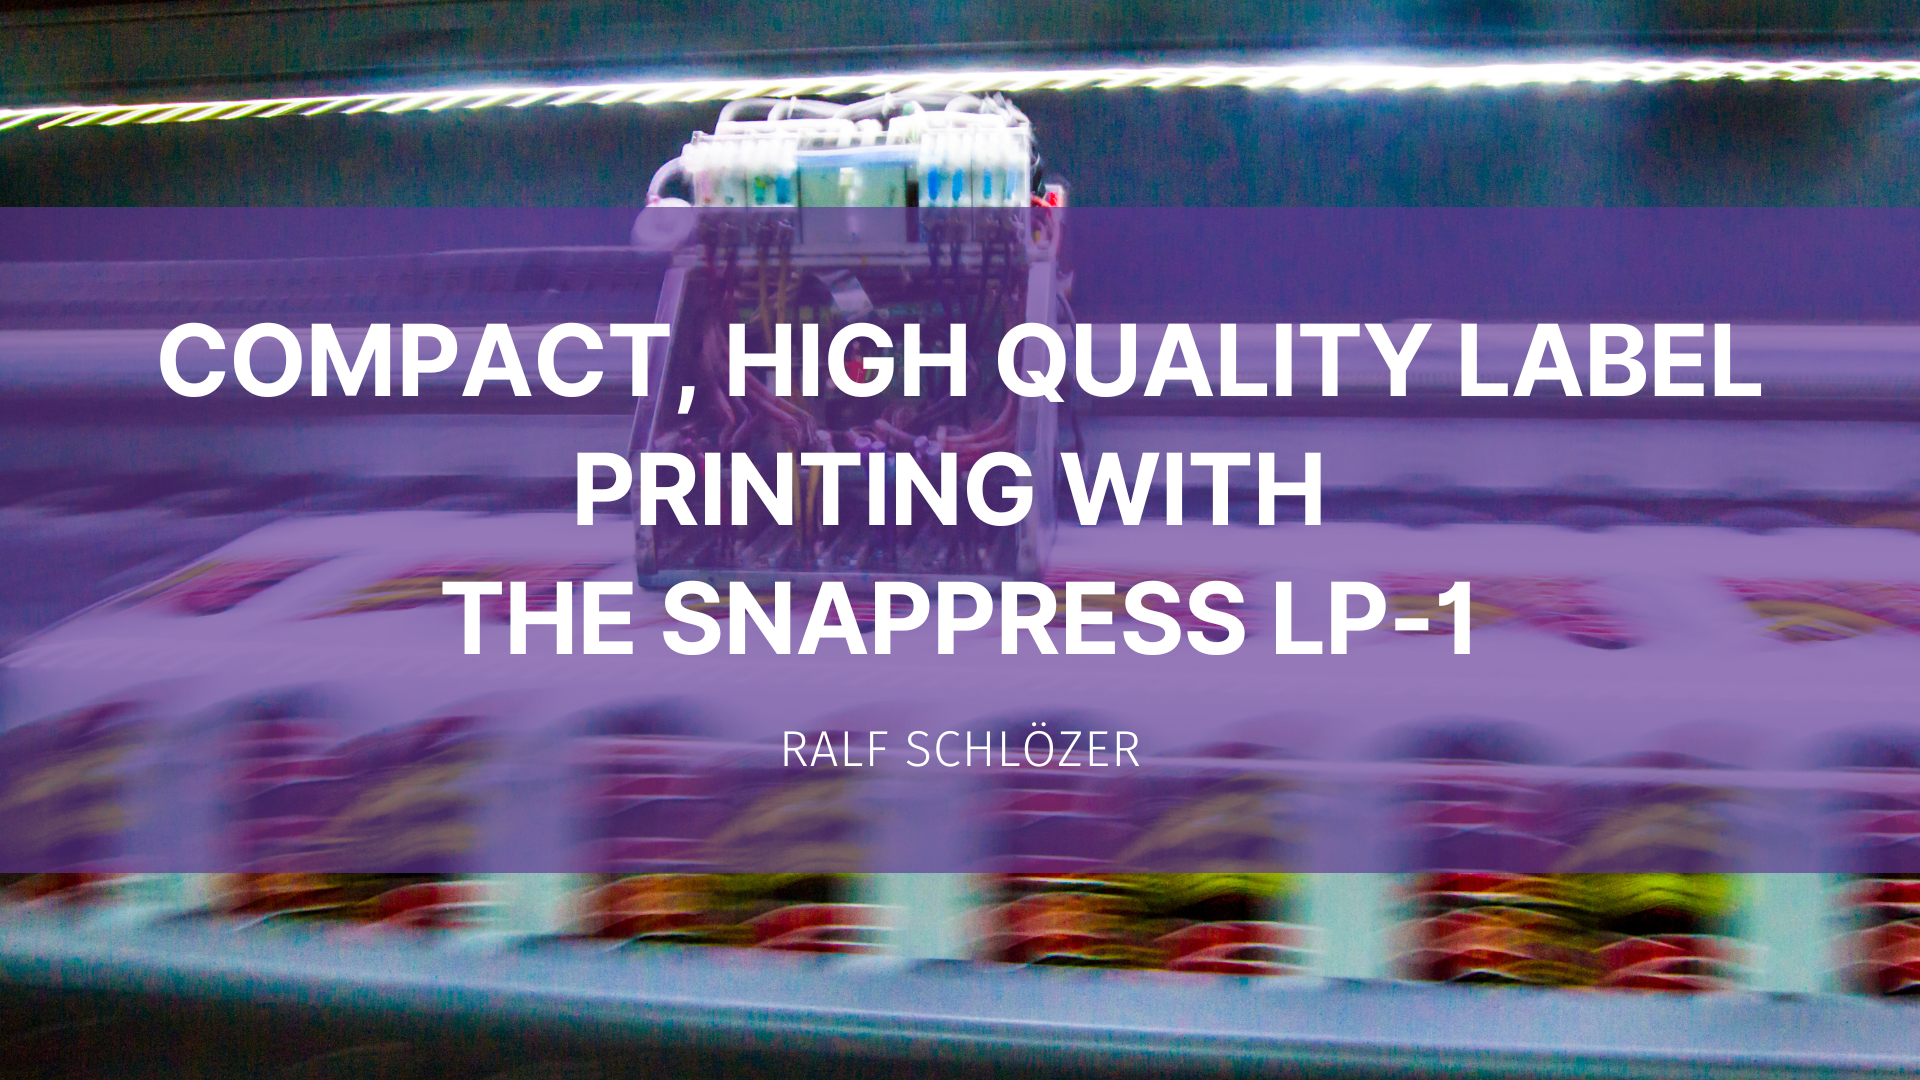 Featured image for “Compact, high quality label printing with the SnapPress LP-1”